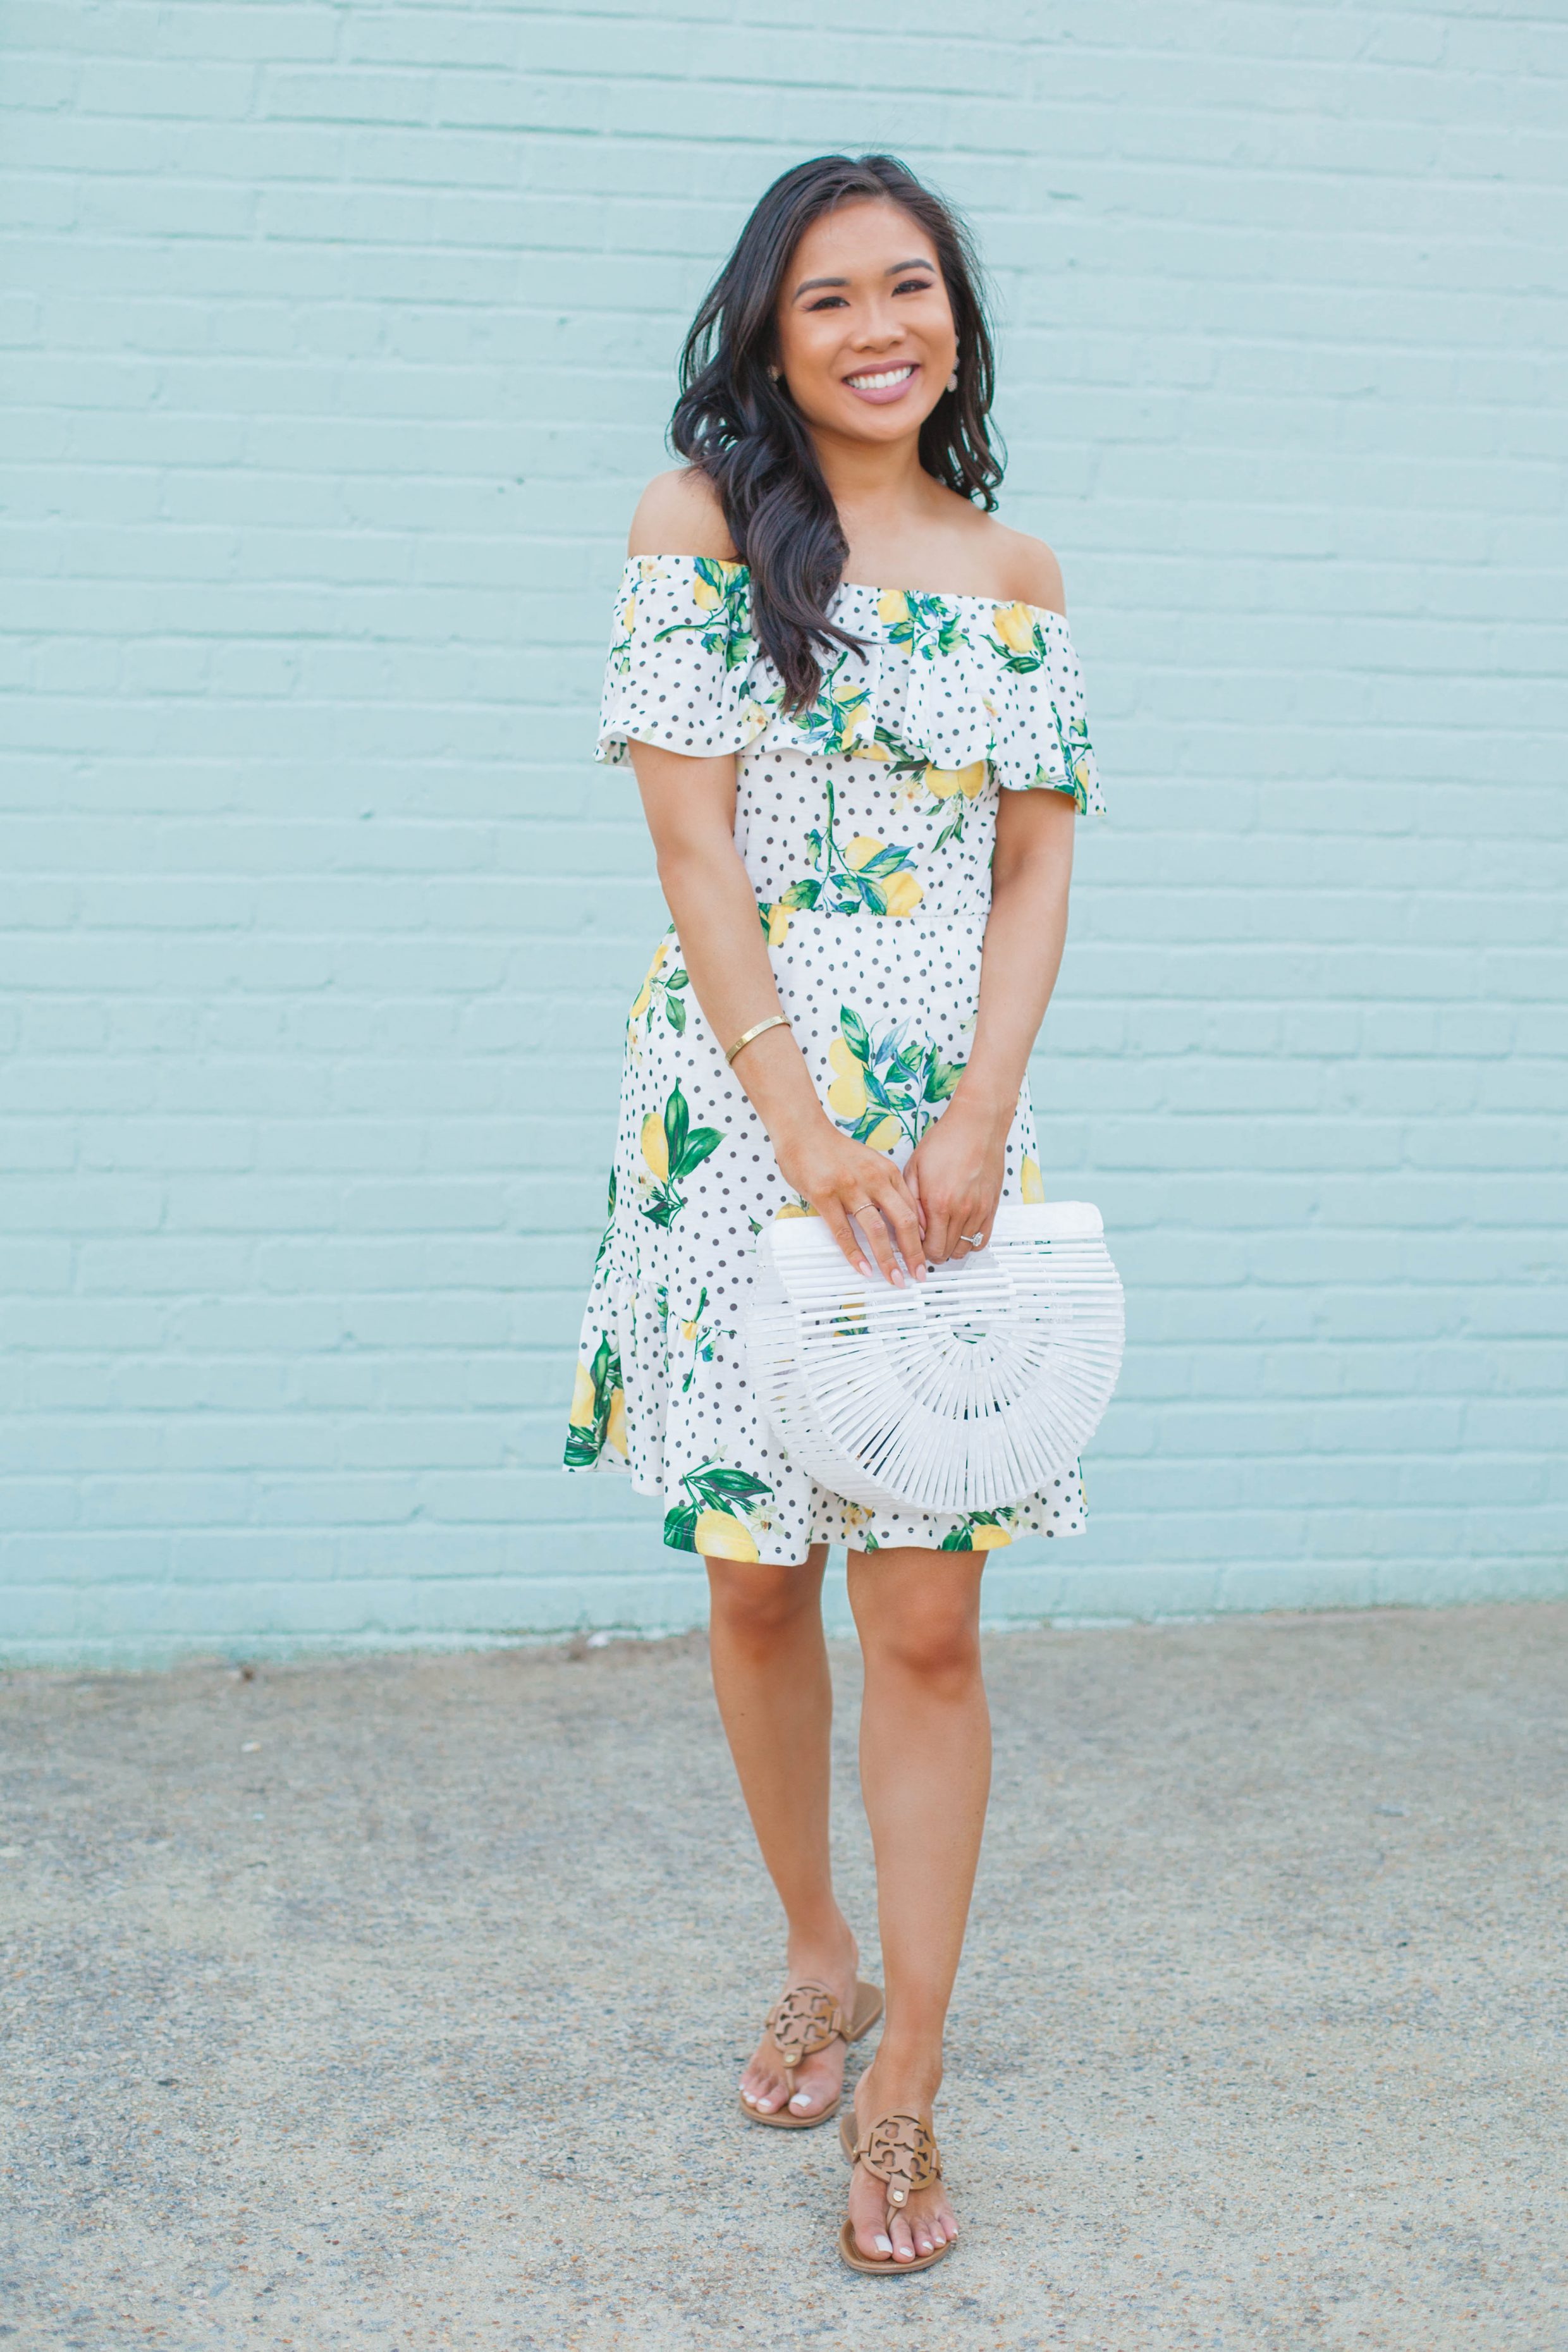 Off the shoulder lemon print dress with a white acrylic bag for summer